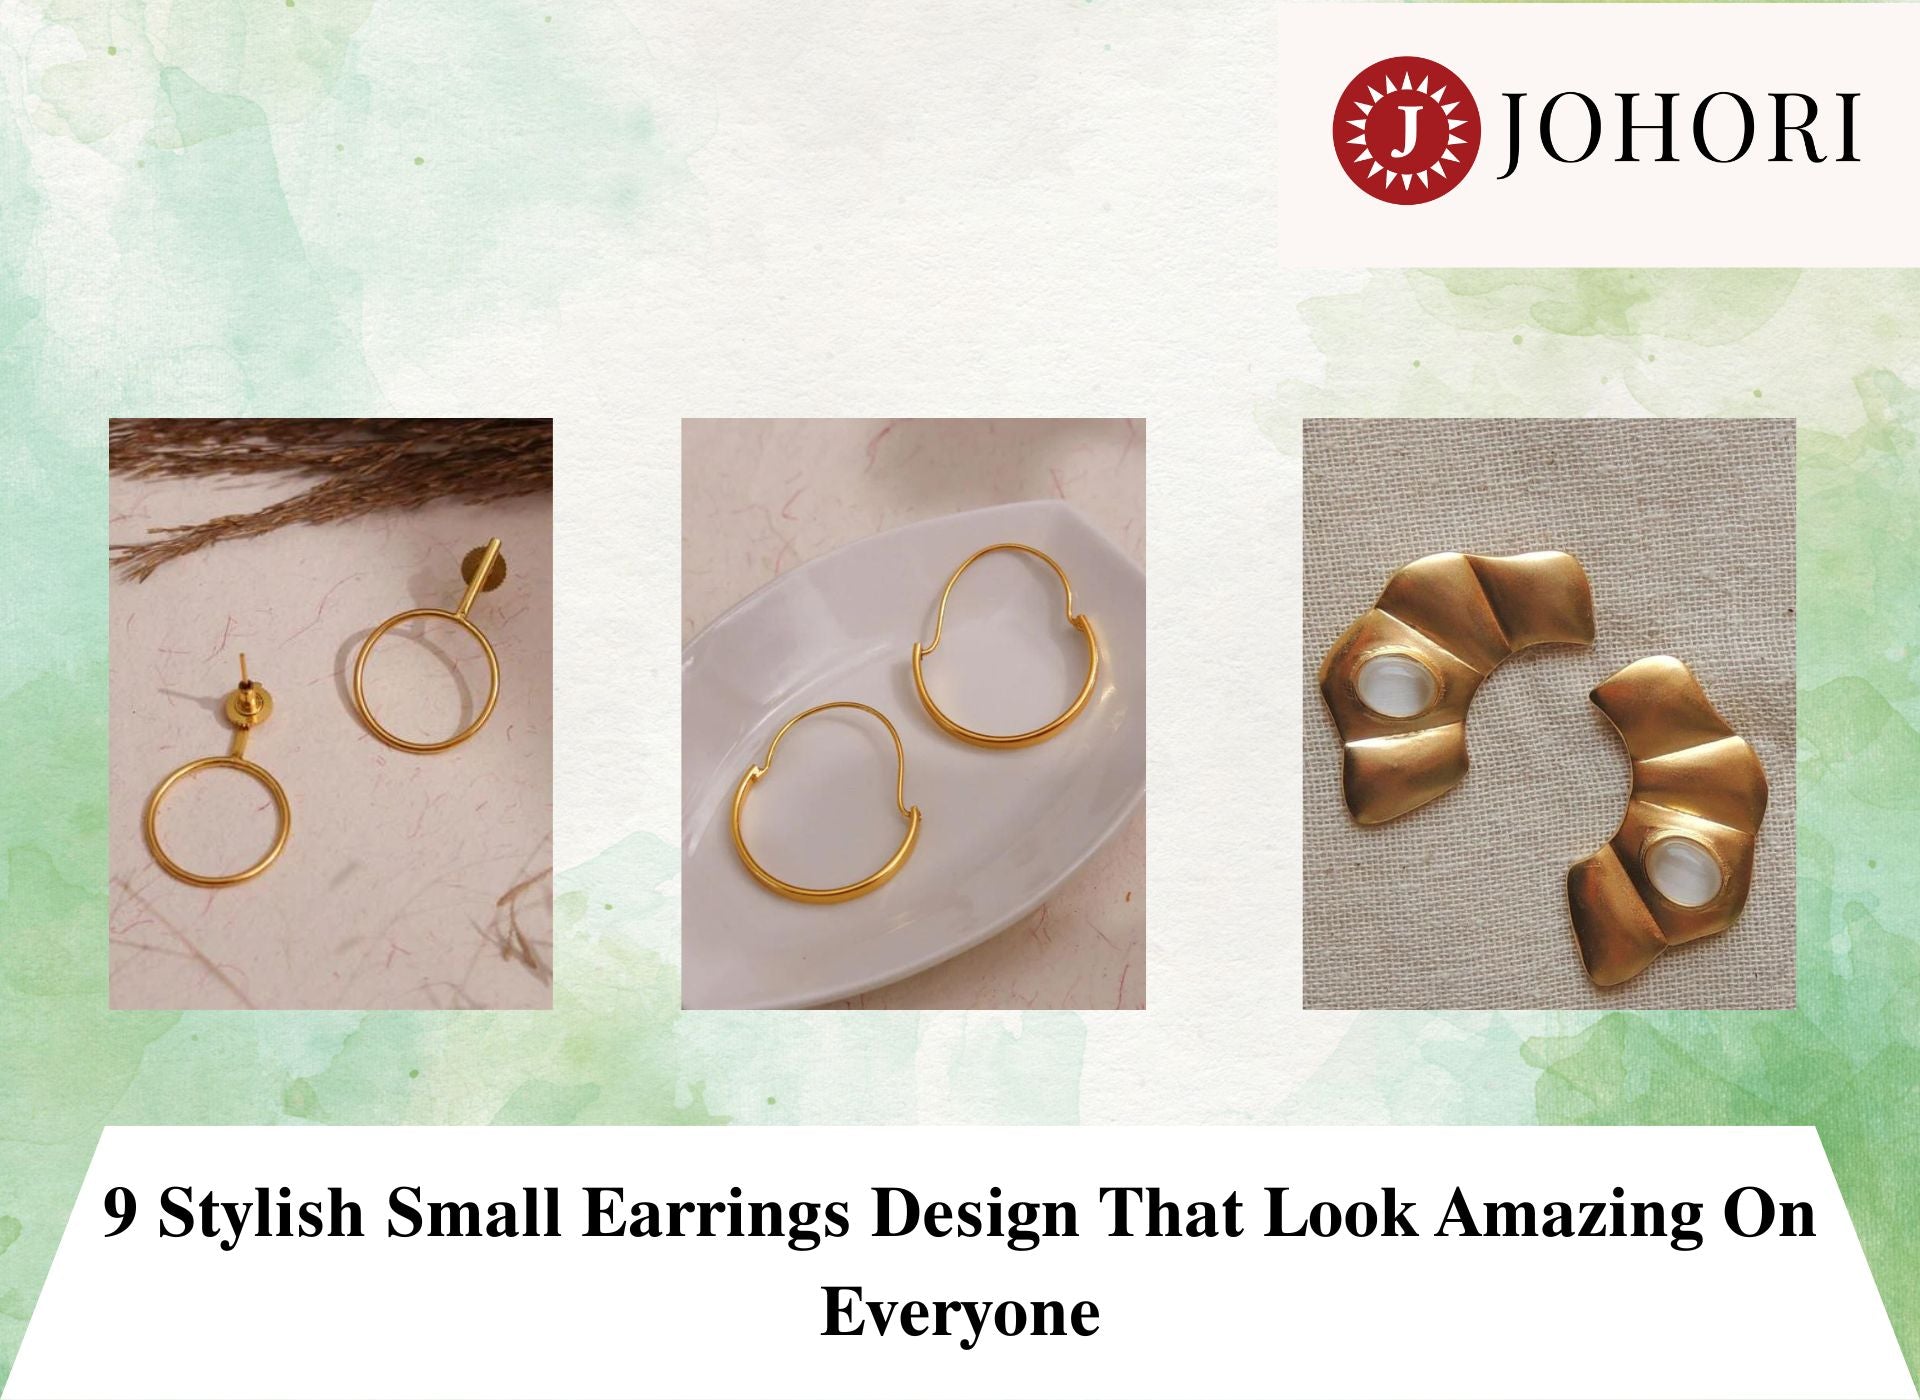 9 Stylish Small Earrings Design That Look Amazing On Everyone